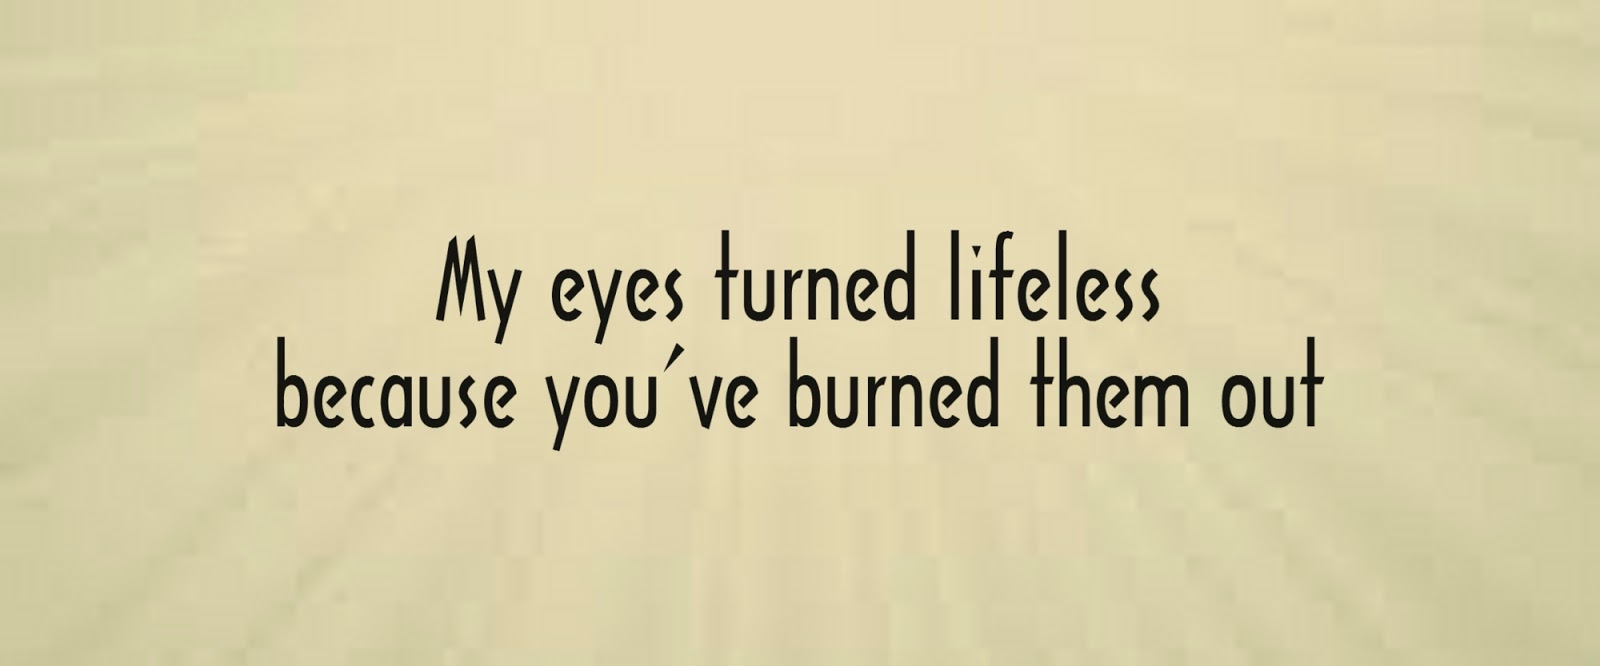 My eyes turned lifeless because you've burned them out